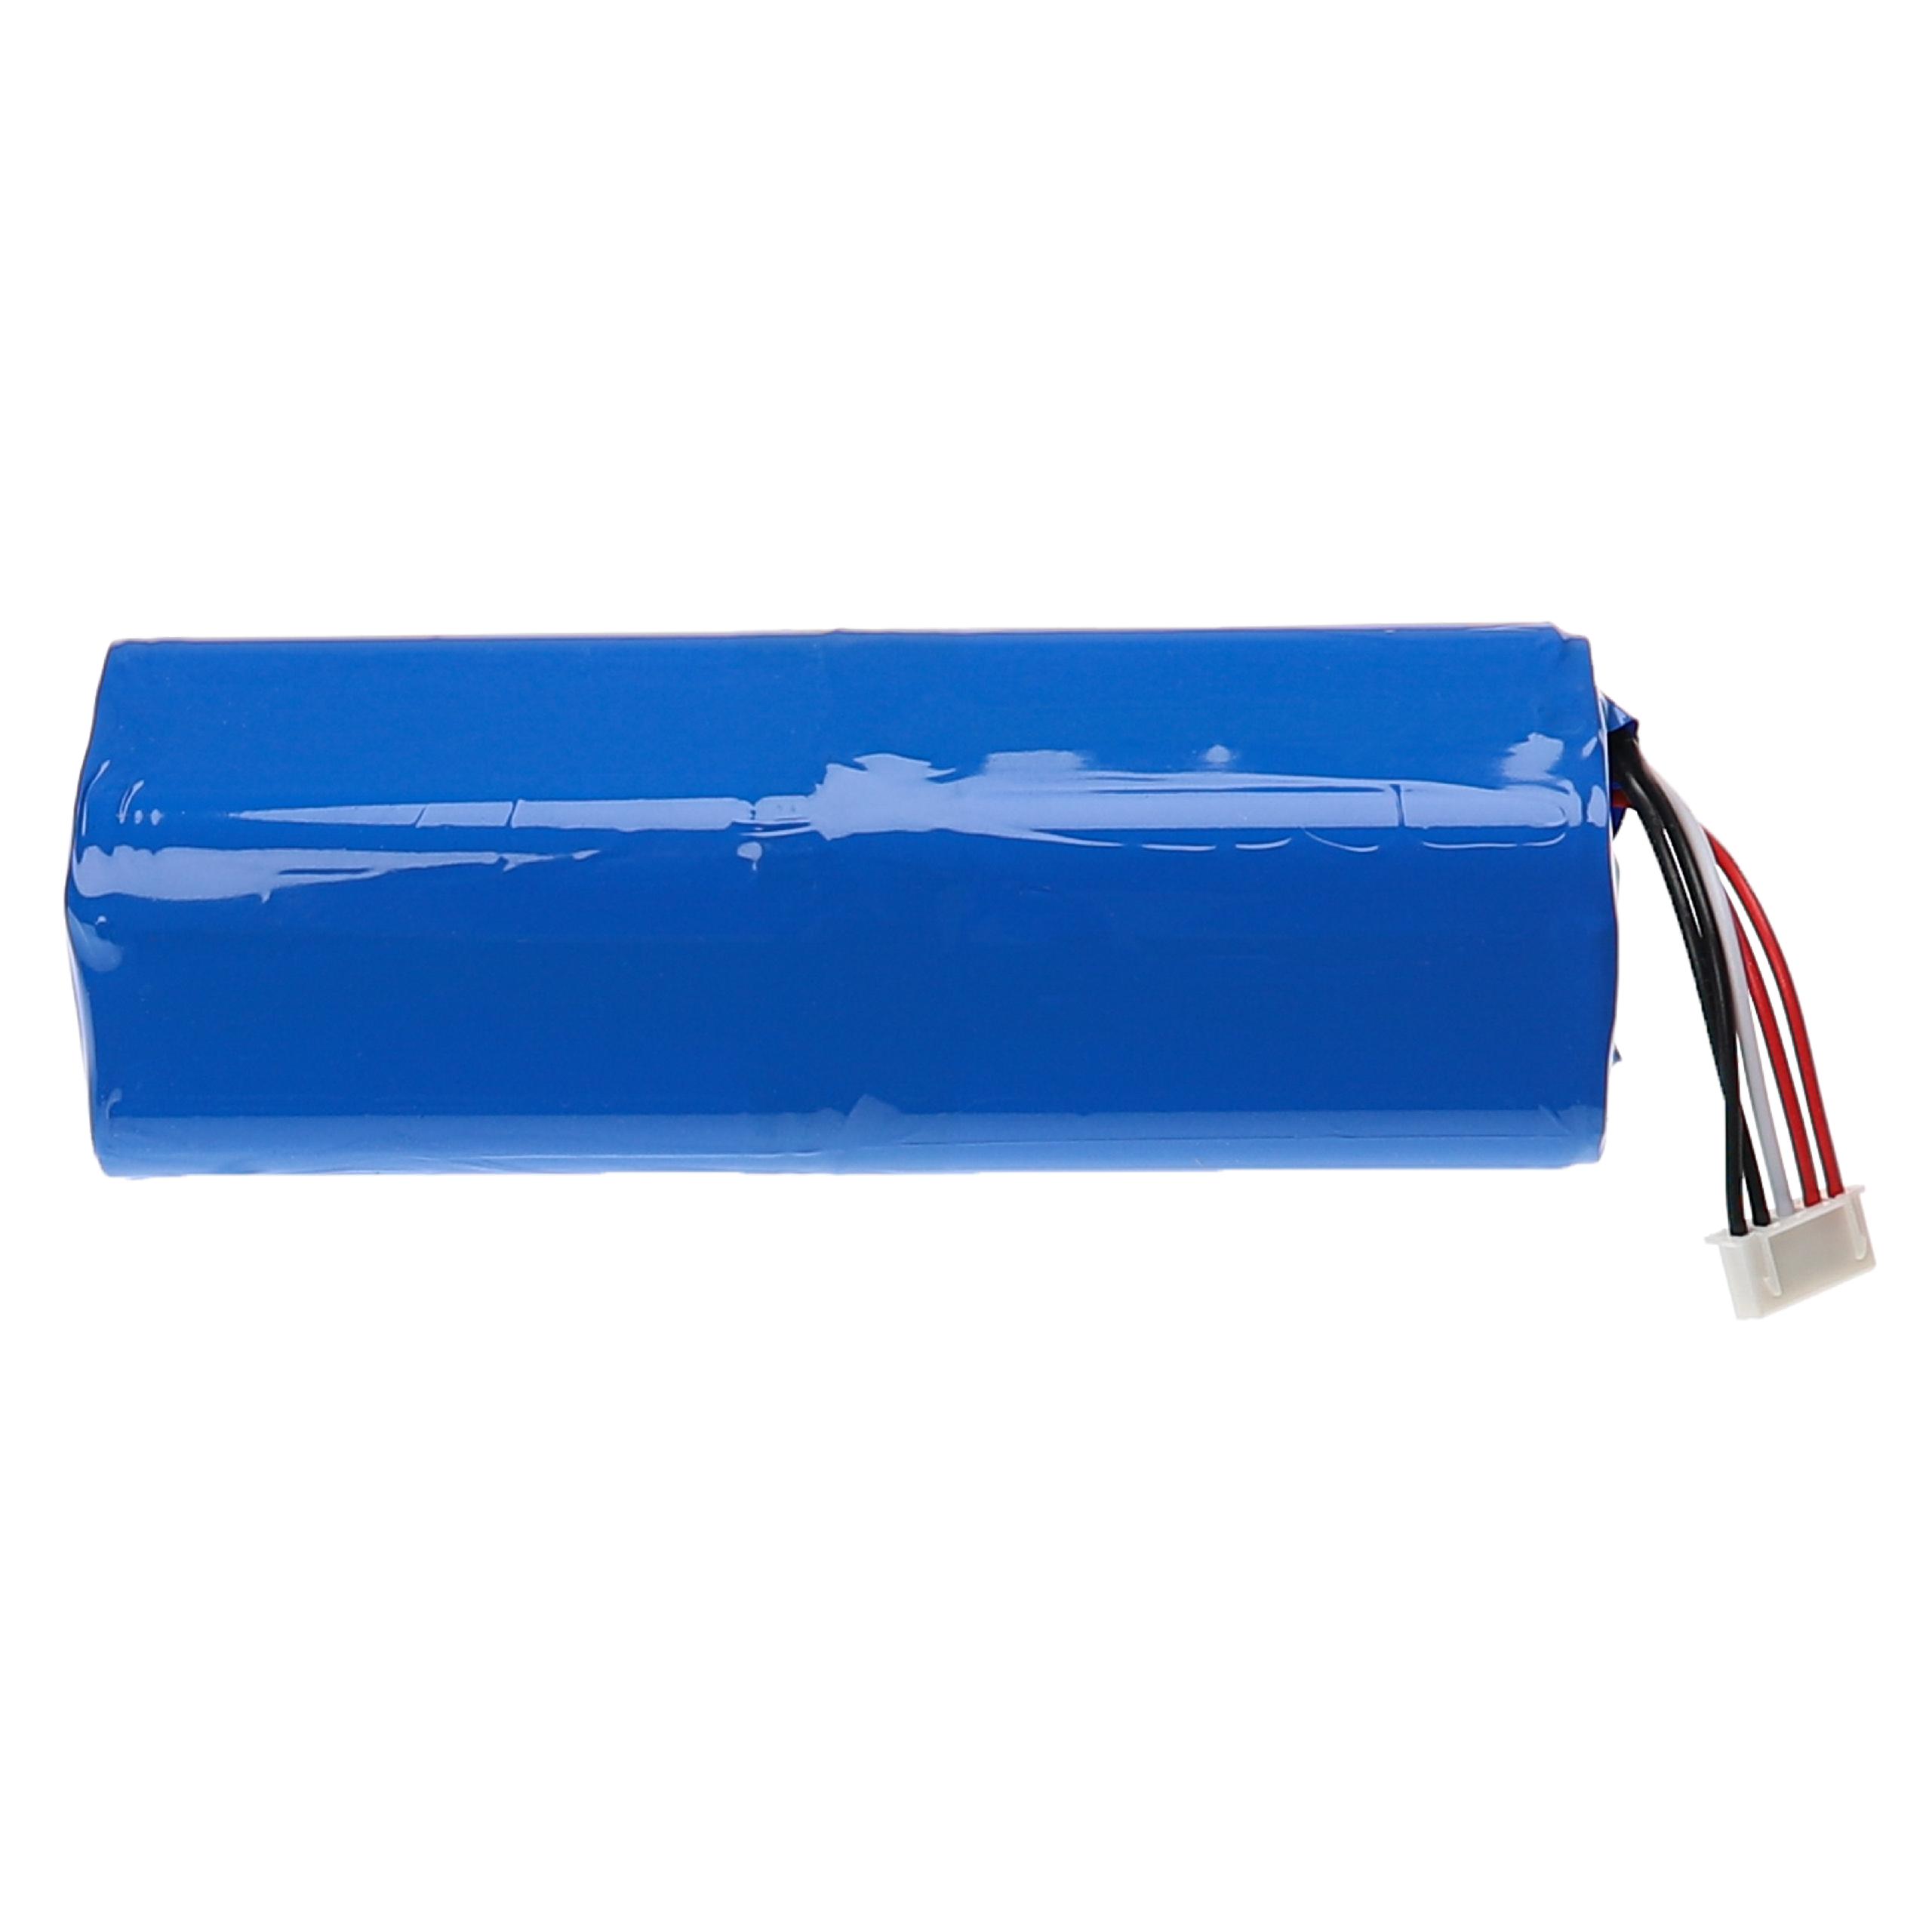 Battery Replacement for Ecovacs 201-1913-4200, 201-1913-4201, S10-Li-144-5200 for - 6800mAh, 14.4V, Li-Ion